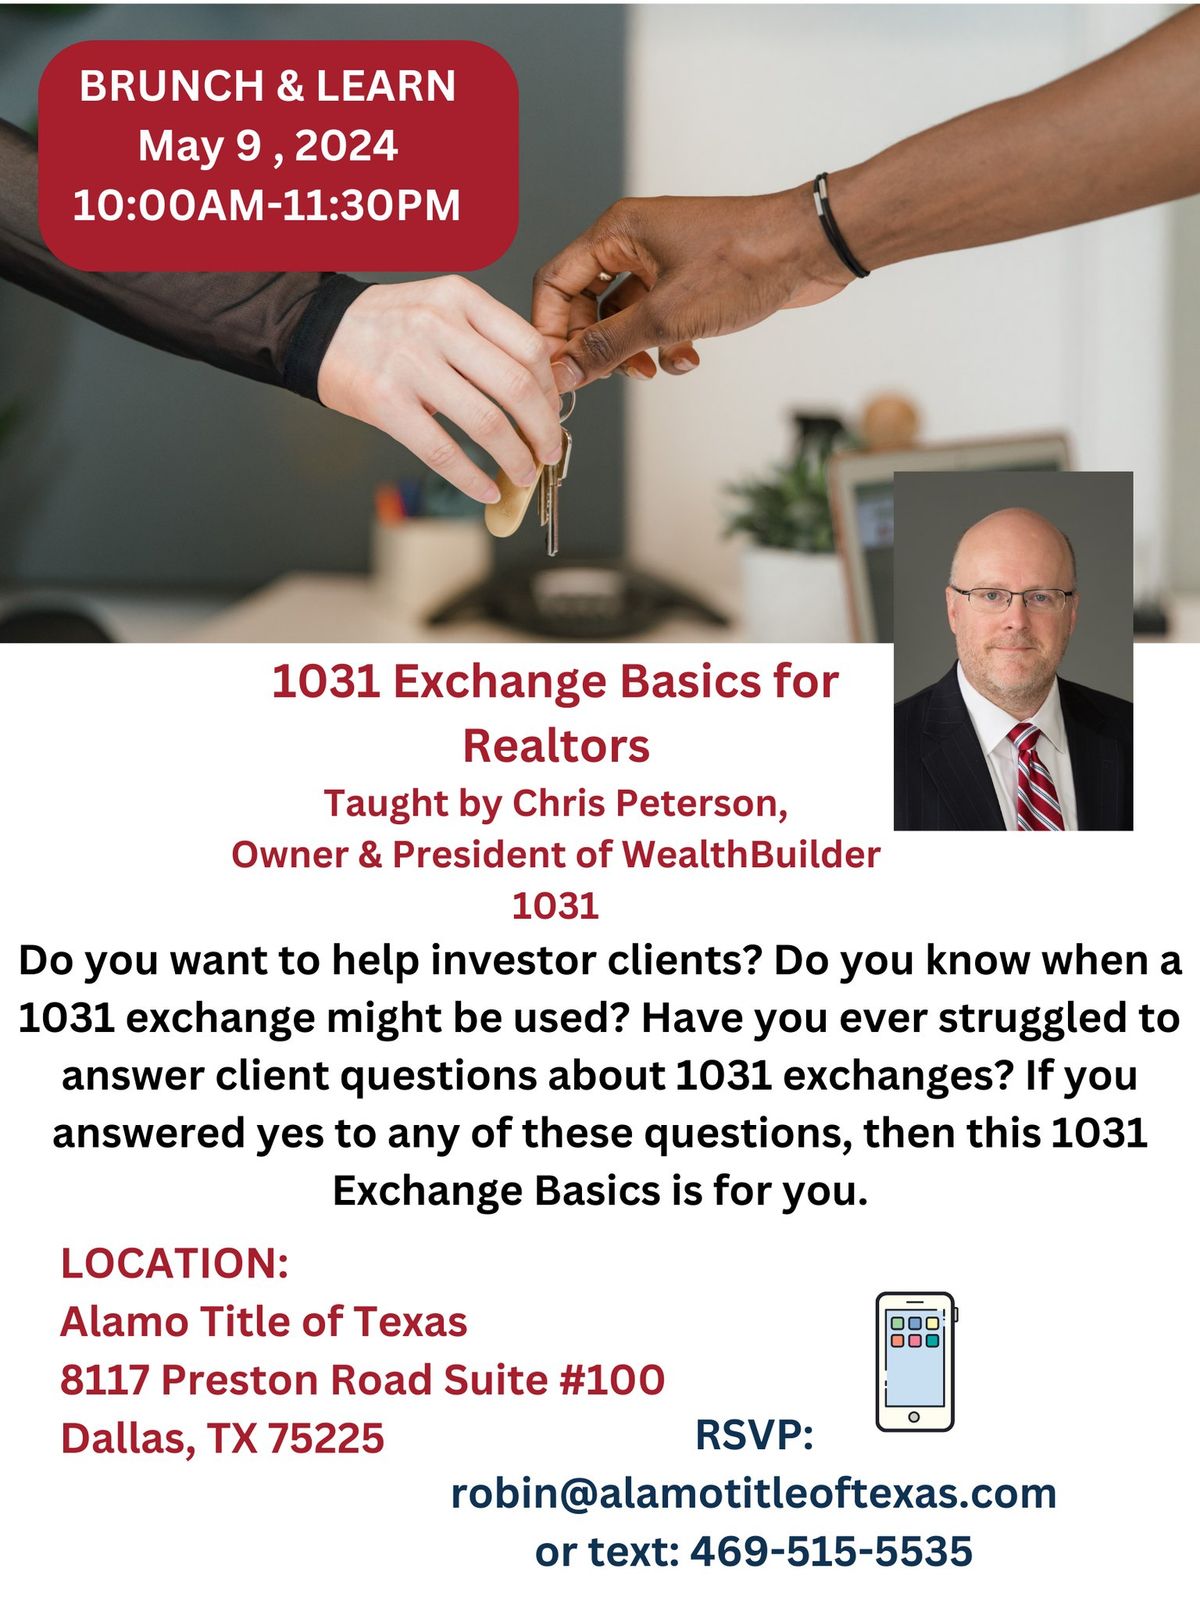 Learn the basics of 1031 Exchanges